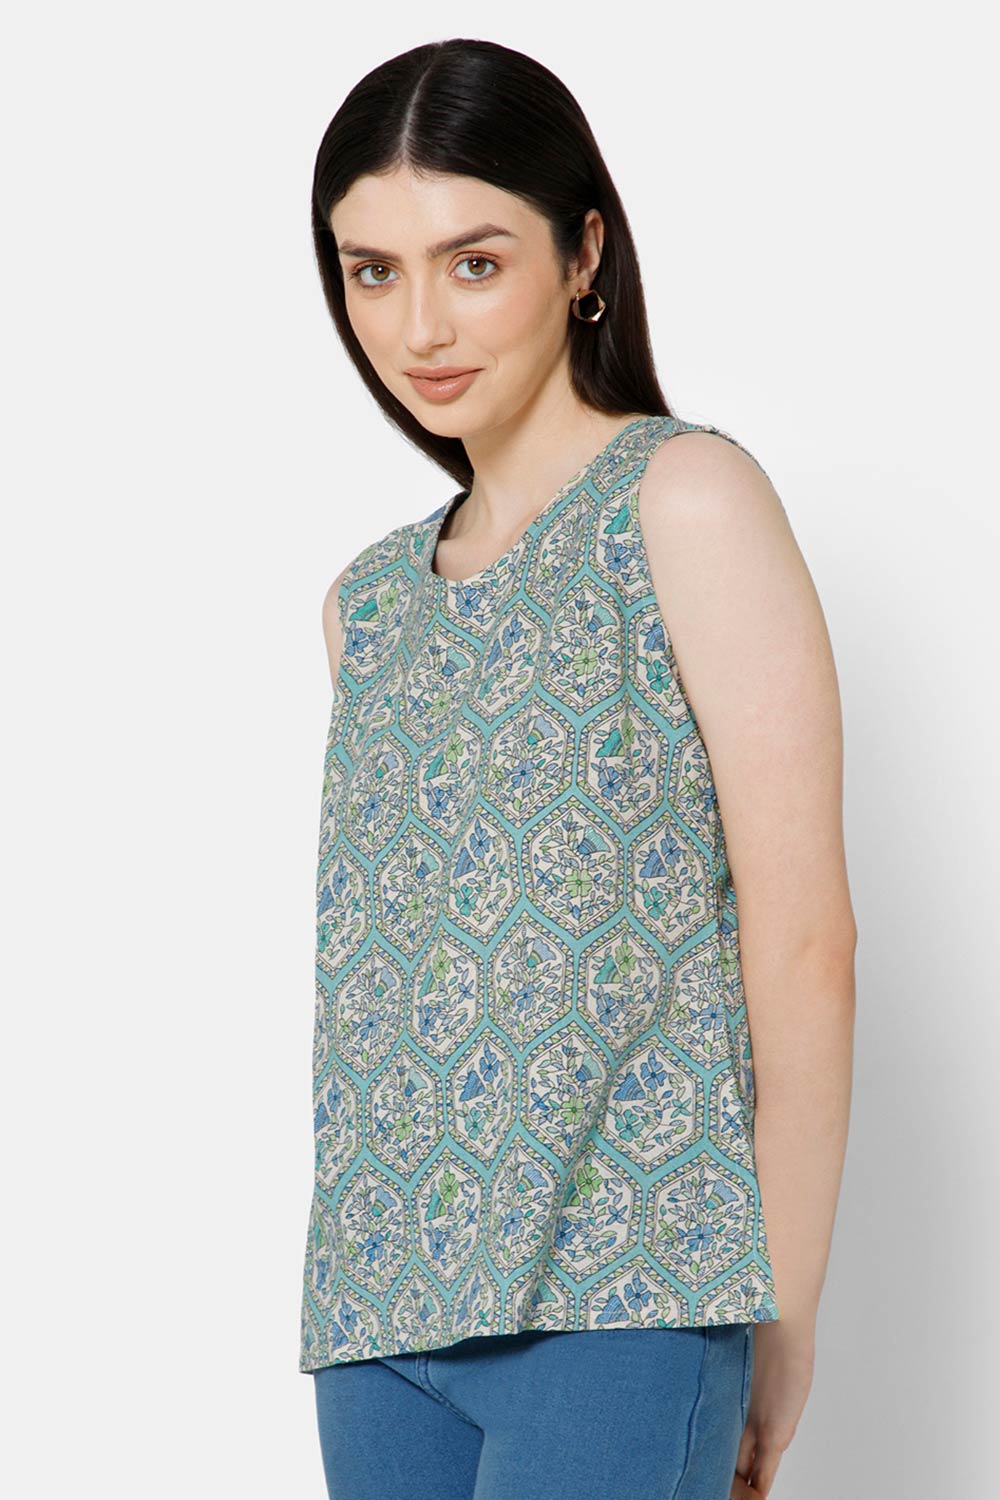 Mythri Women's Regular Casual Top - Blue - TO18